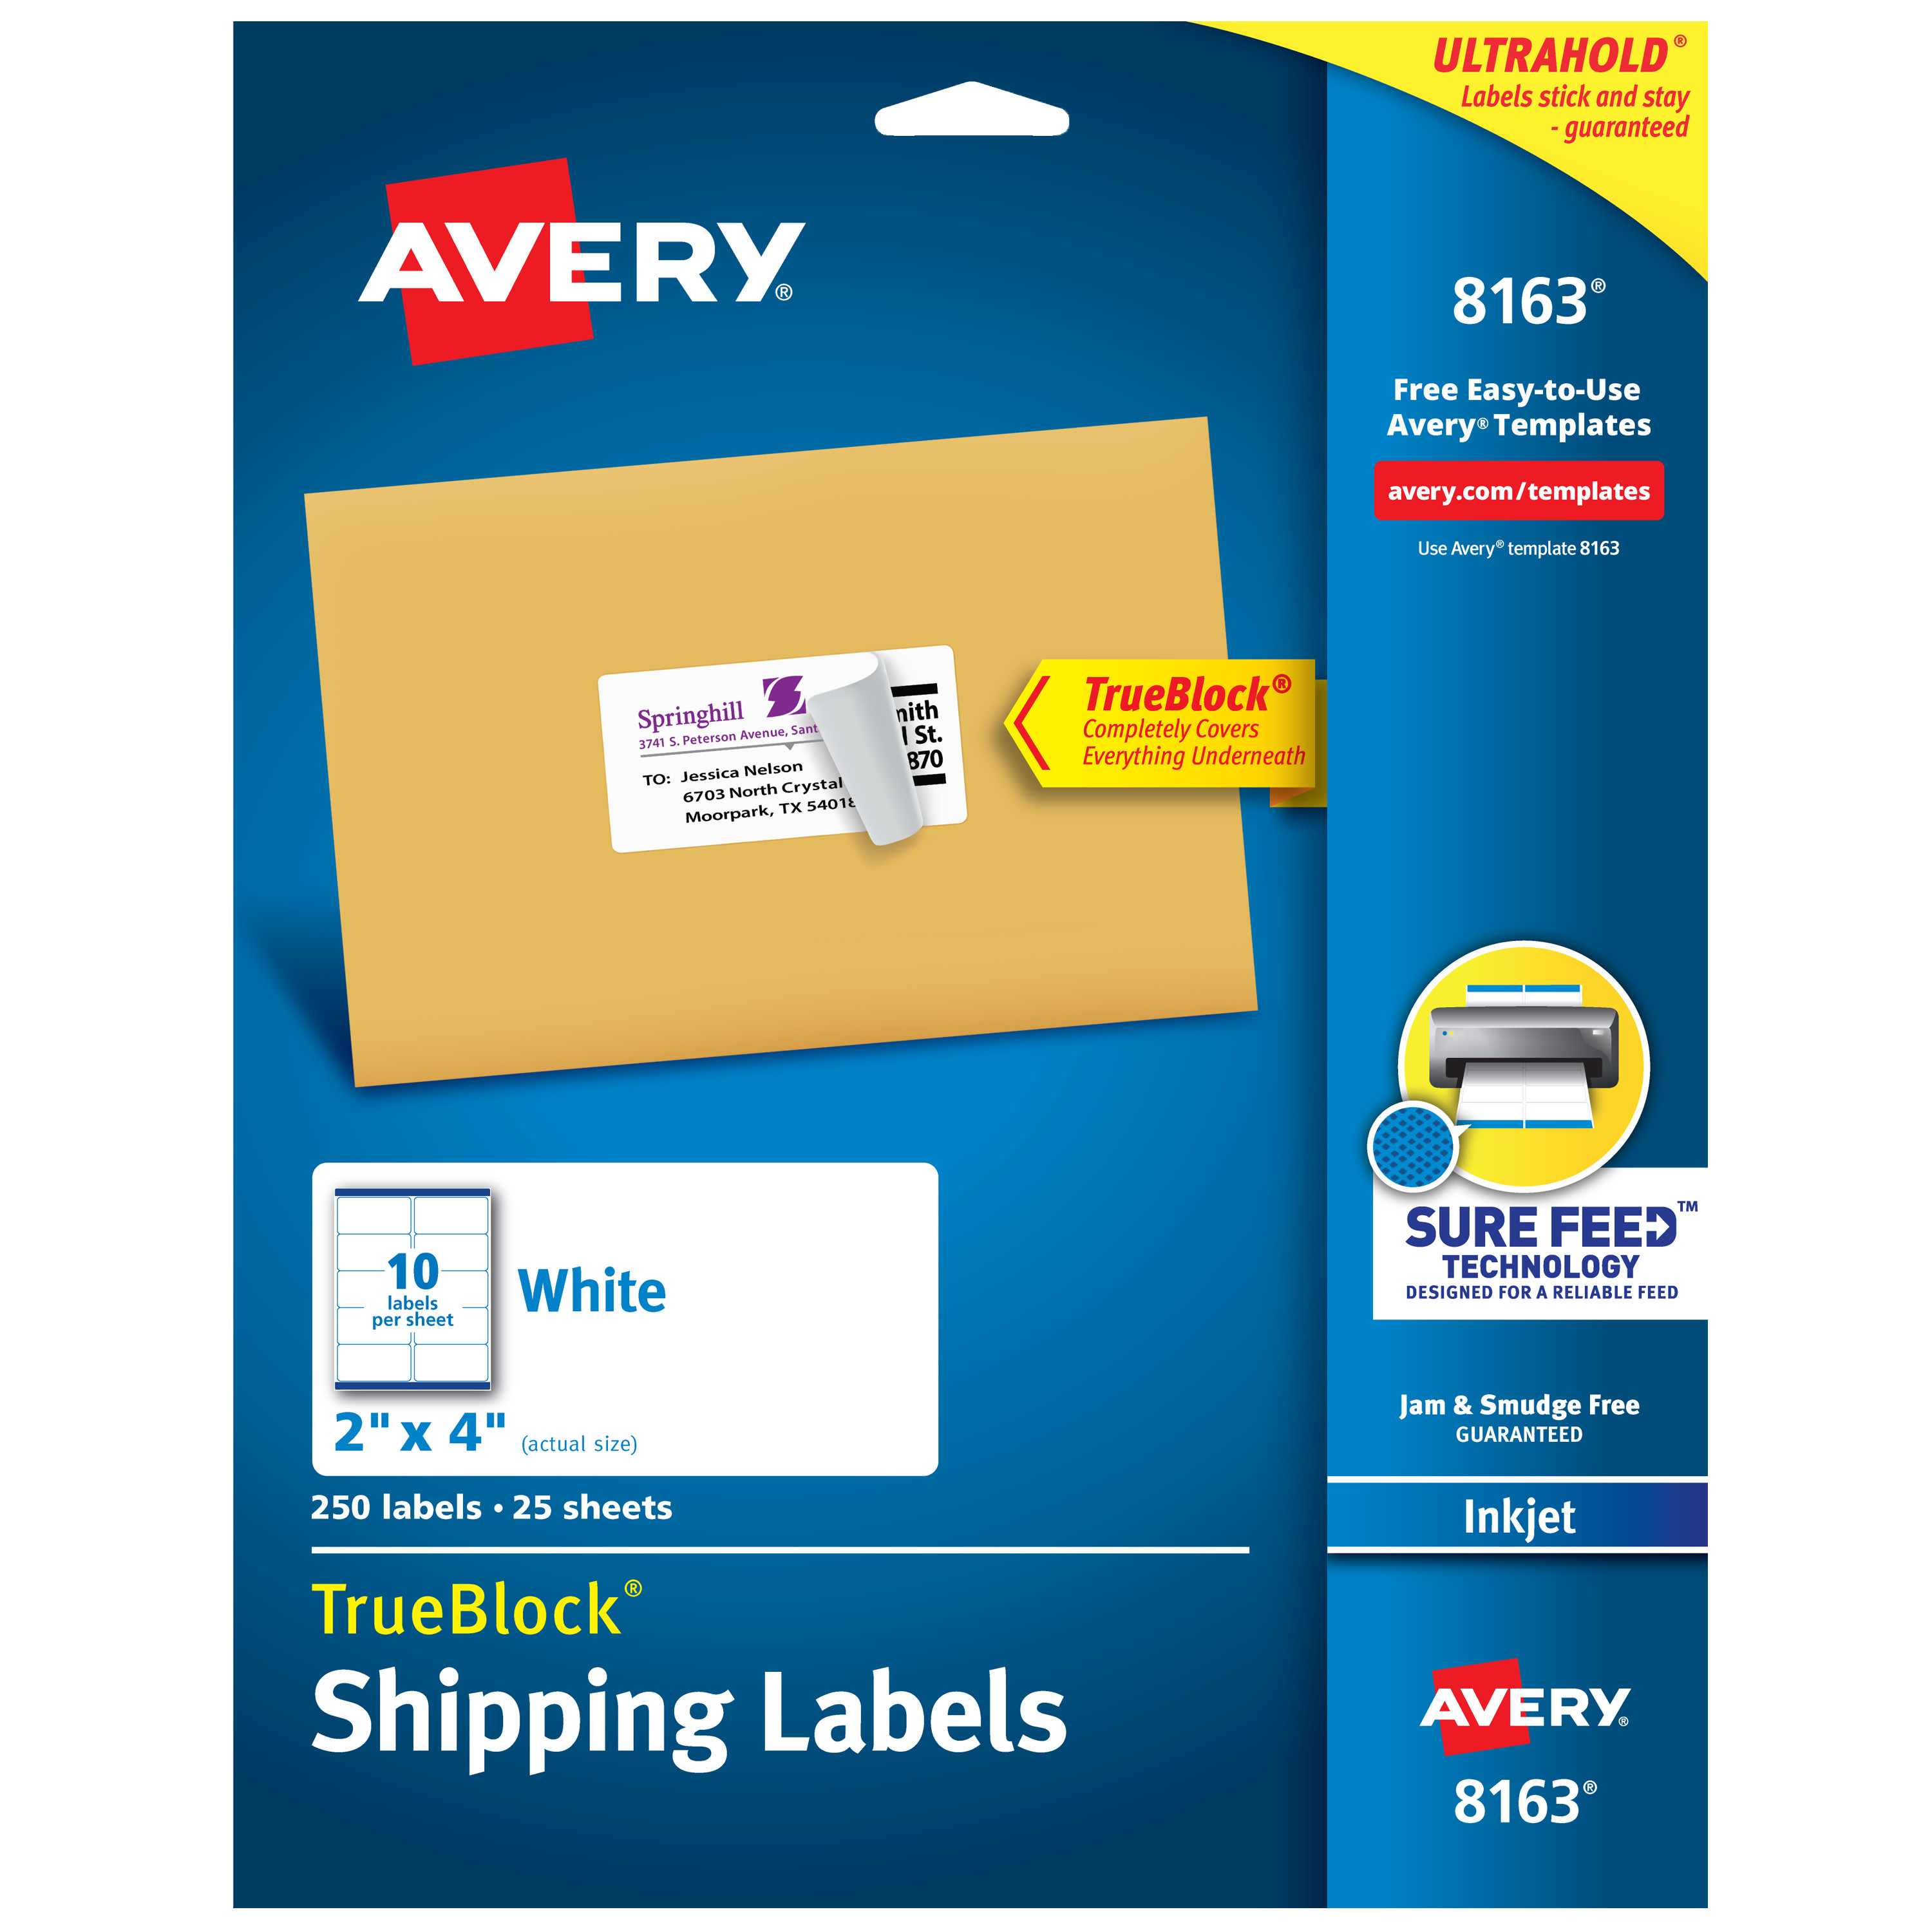 Avery TrueBlock Shipping Labels, Sure Feed Technology, Permanent Adhesive, 2" x 4", 250 Labels (8163) - image 1 of 9